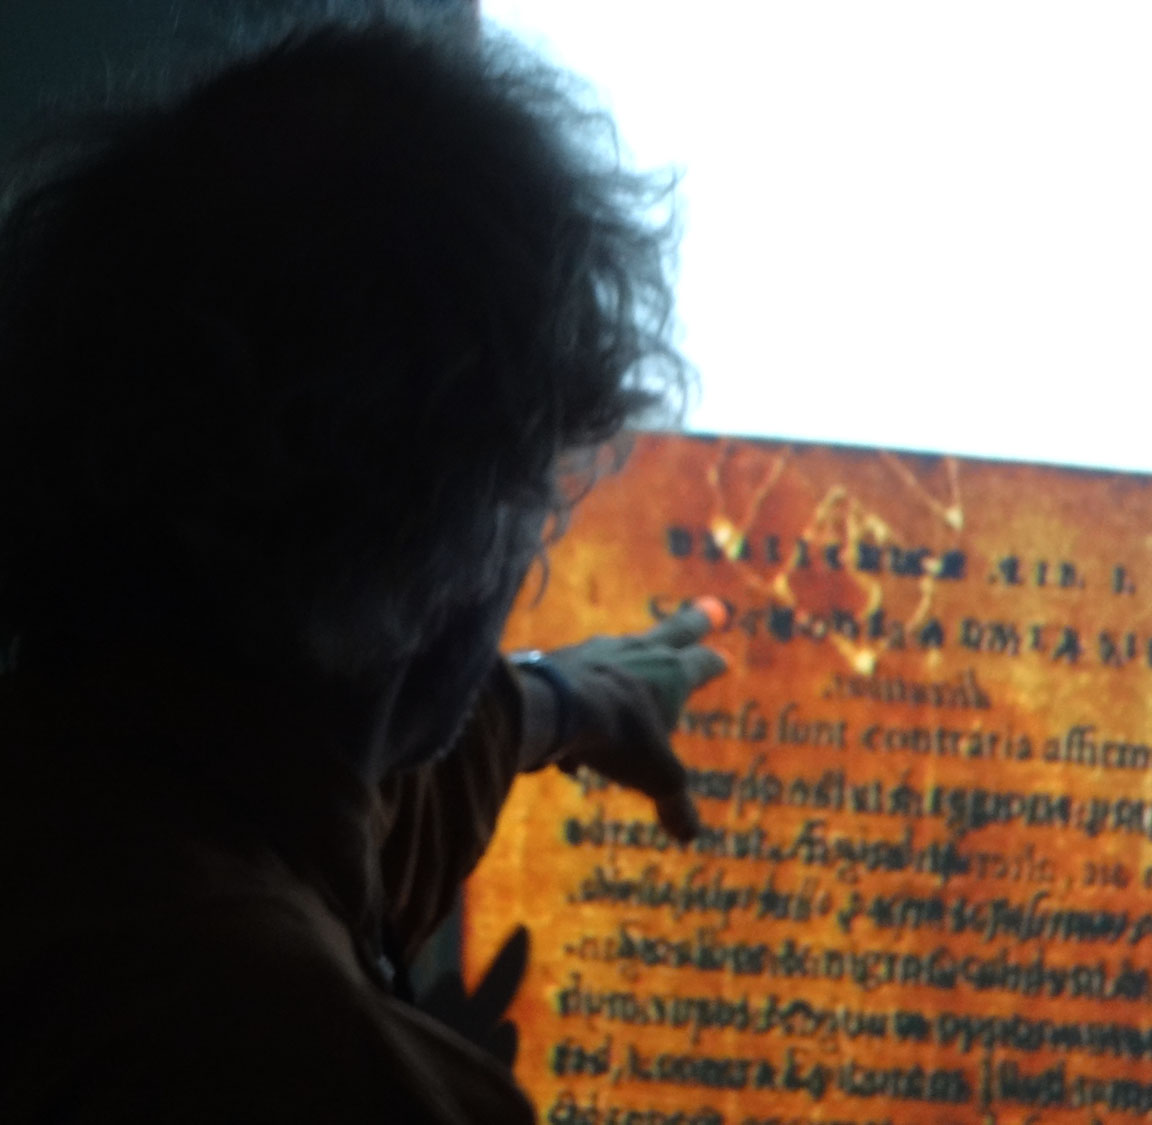 Harris points out a projected watermark on a 16th century octavo